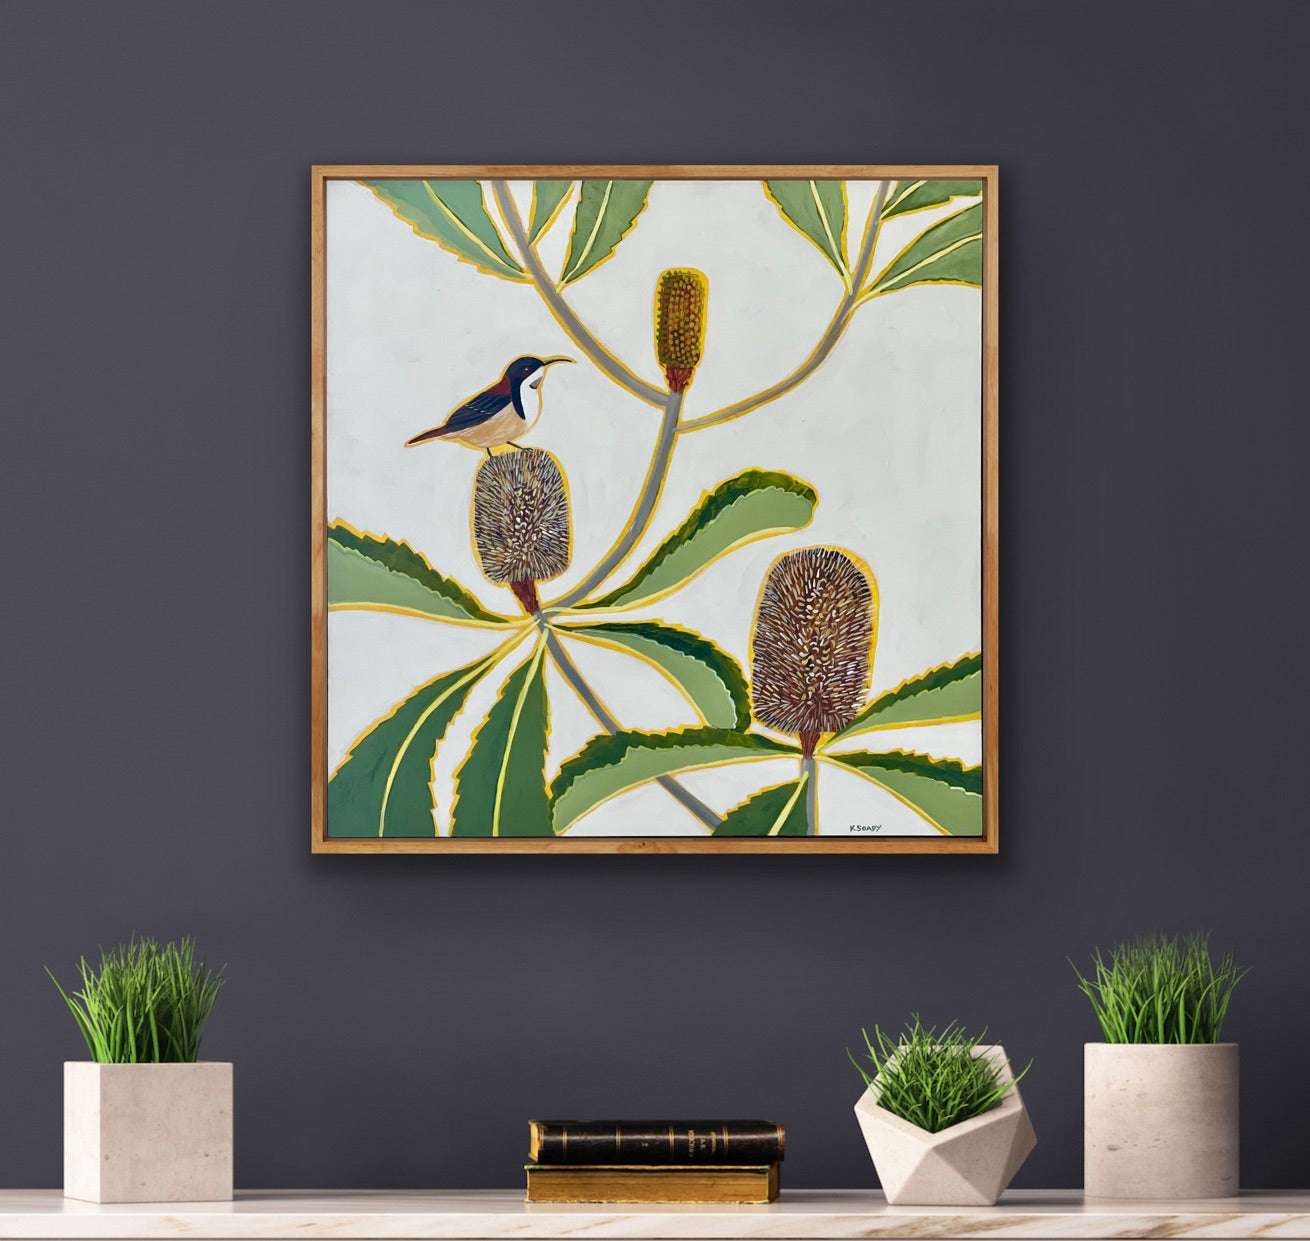 Robur Banksia and Spinebill #2